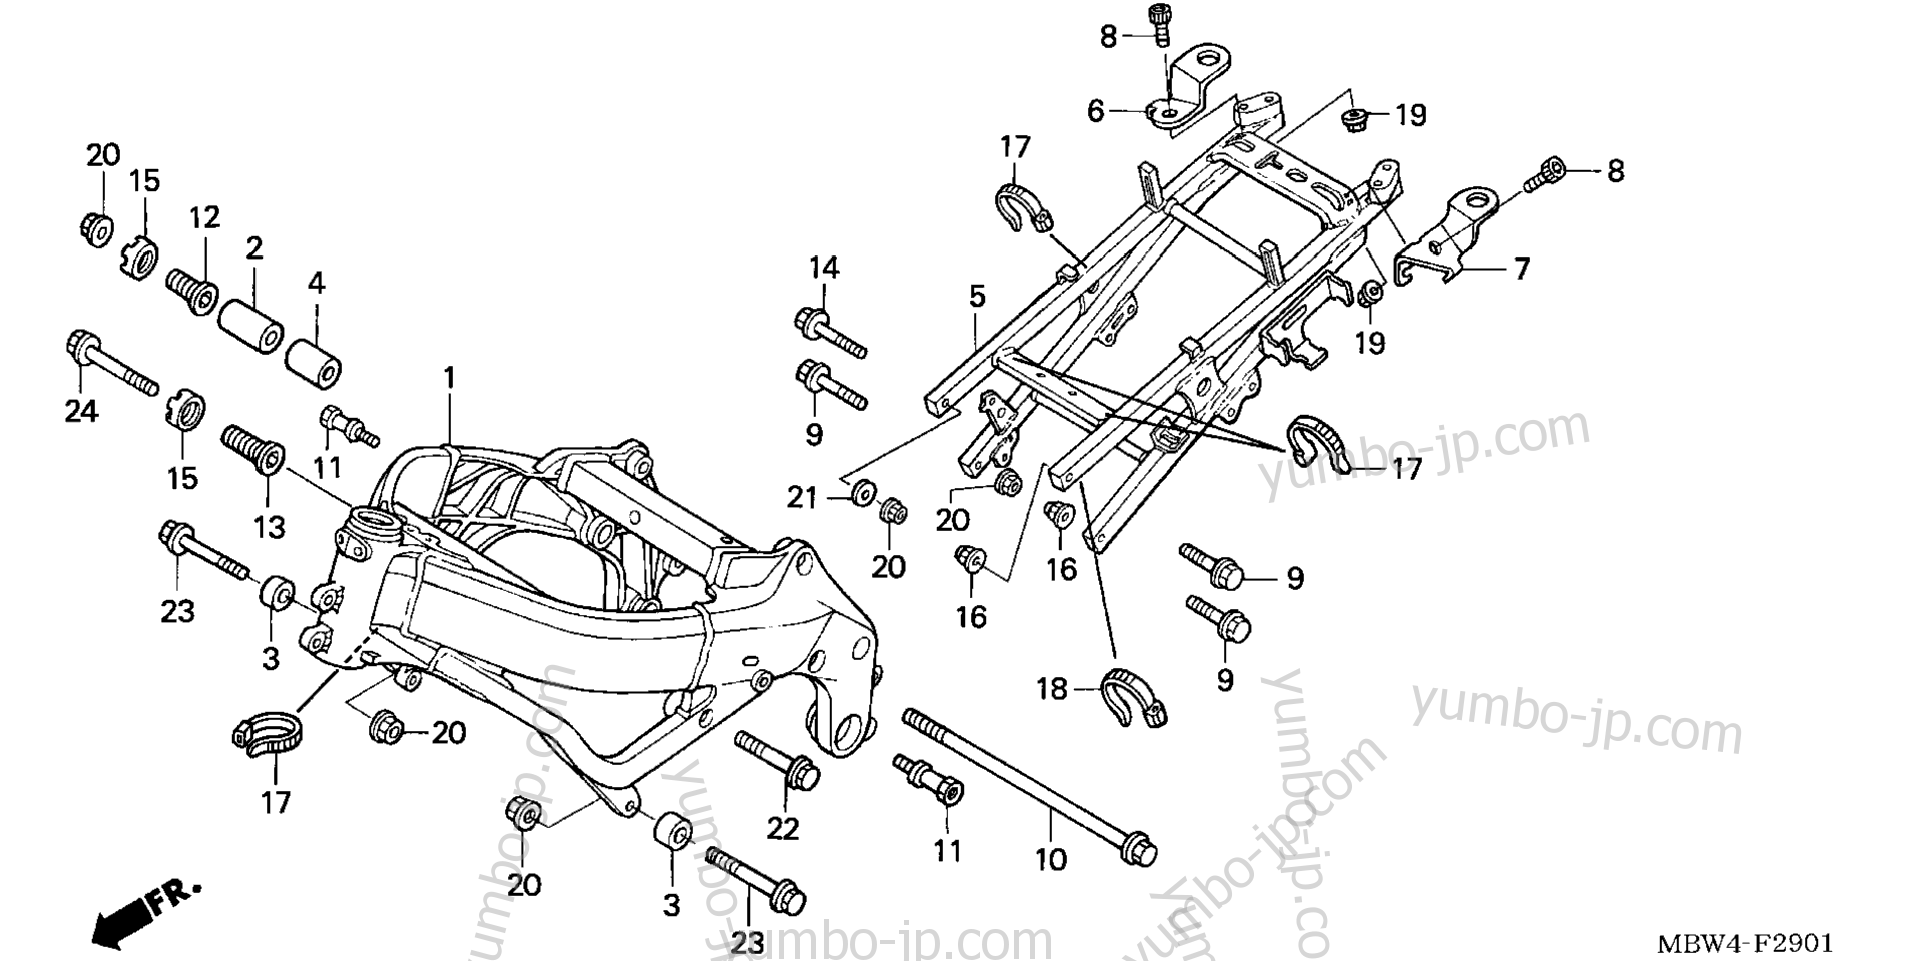 FRAME ('04-'06) for motorcycles HONDA CBR600F4 AC 2004 year